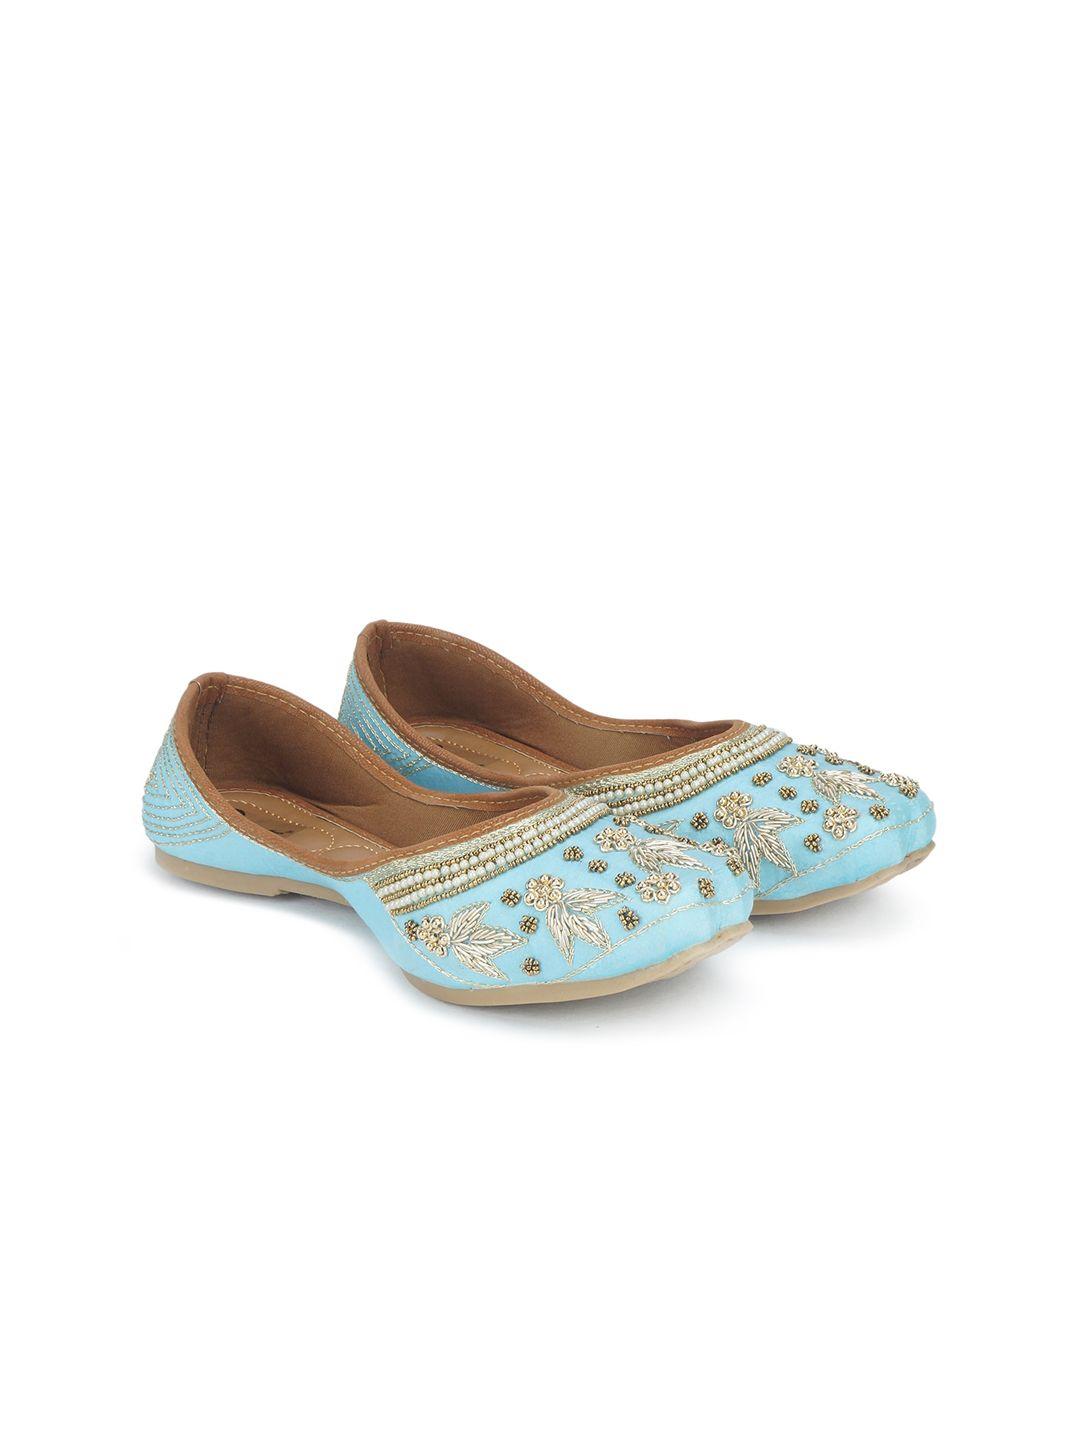 The Desi Dulhan Women Blue Embellished Leather Party Mojaris Flats